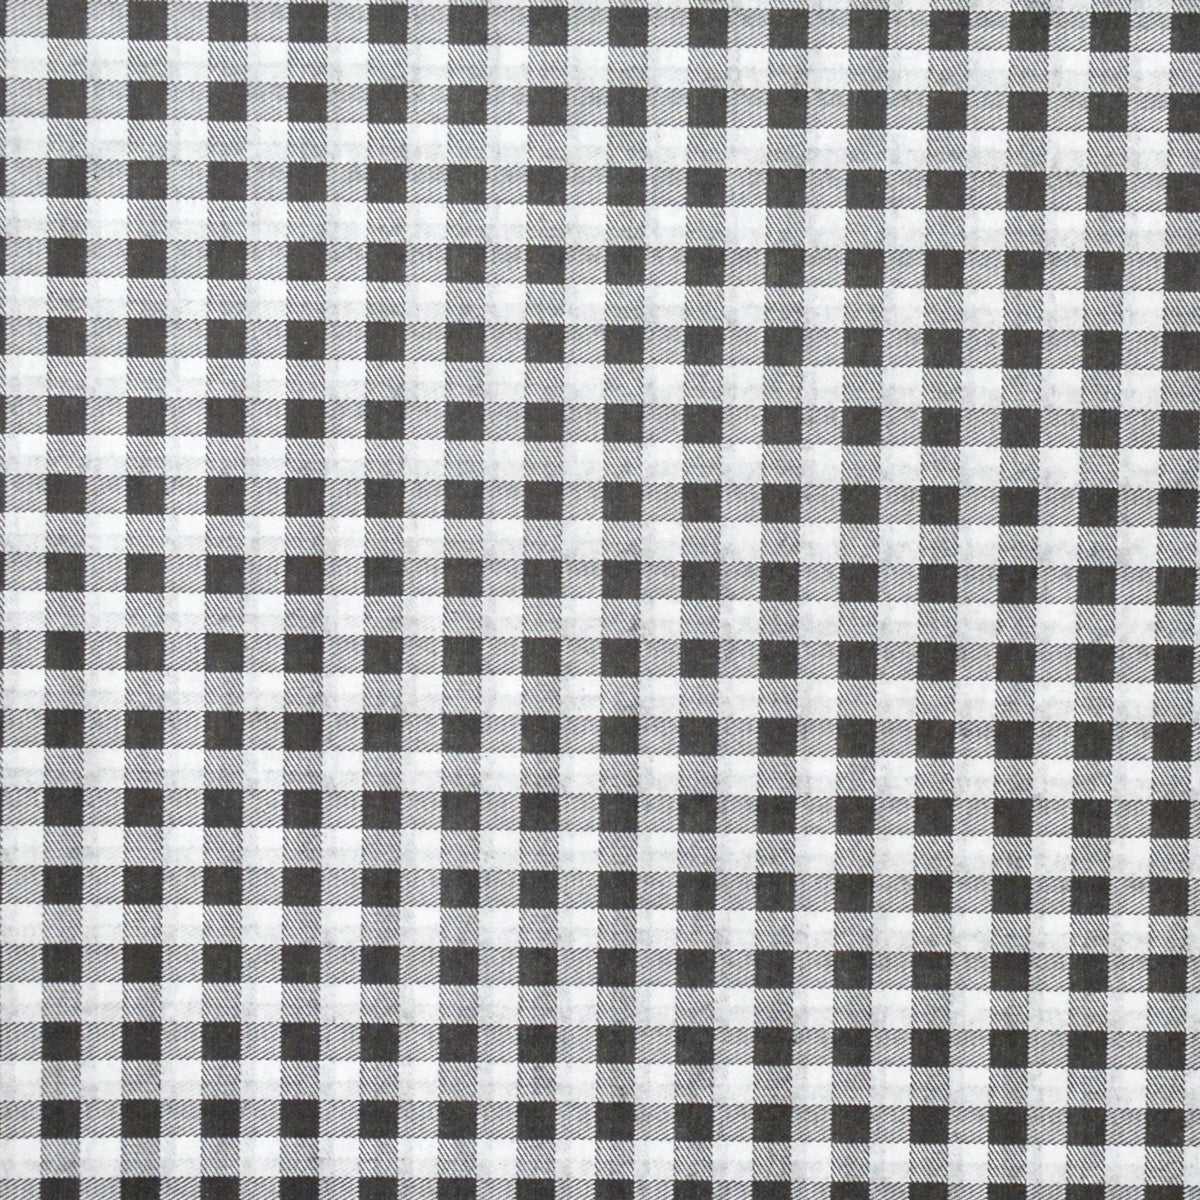 Black Gingham Tissue Paper - Black Gingham Pattern Tissue Paper, New Year Eve, Men Boutique Retail Packaging Supplies, Christmas Gift Wrapping Wrap Paper, Men's Gift Wrapping Paper, Craft Supplies, Bachelor Party Favor Bags Paper GenWoo Shop